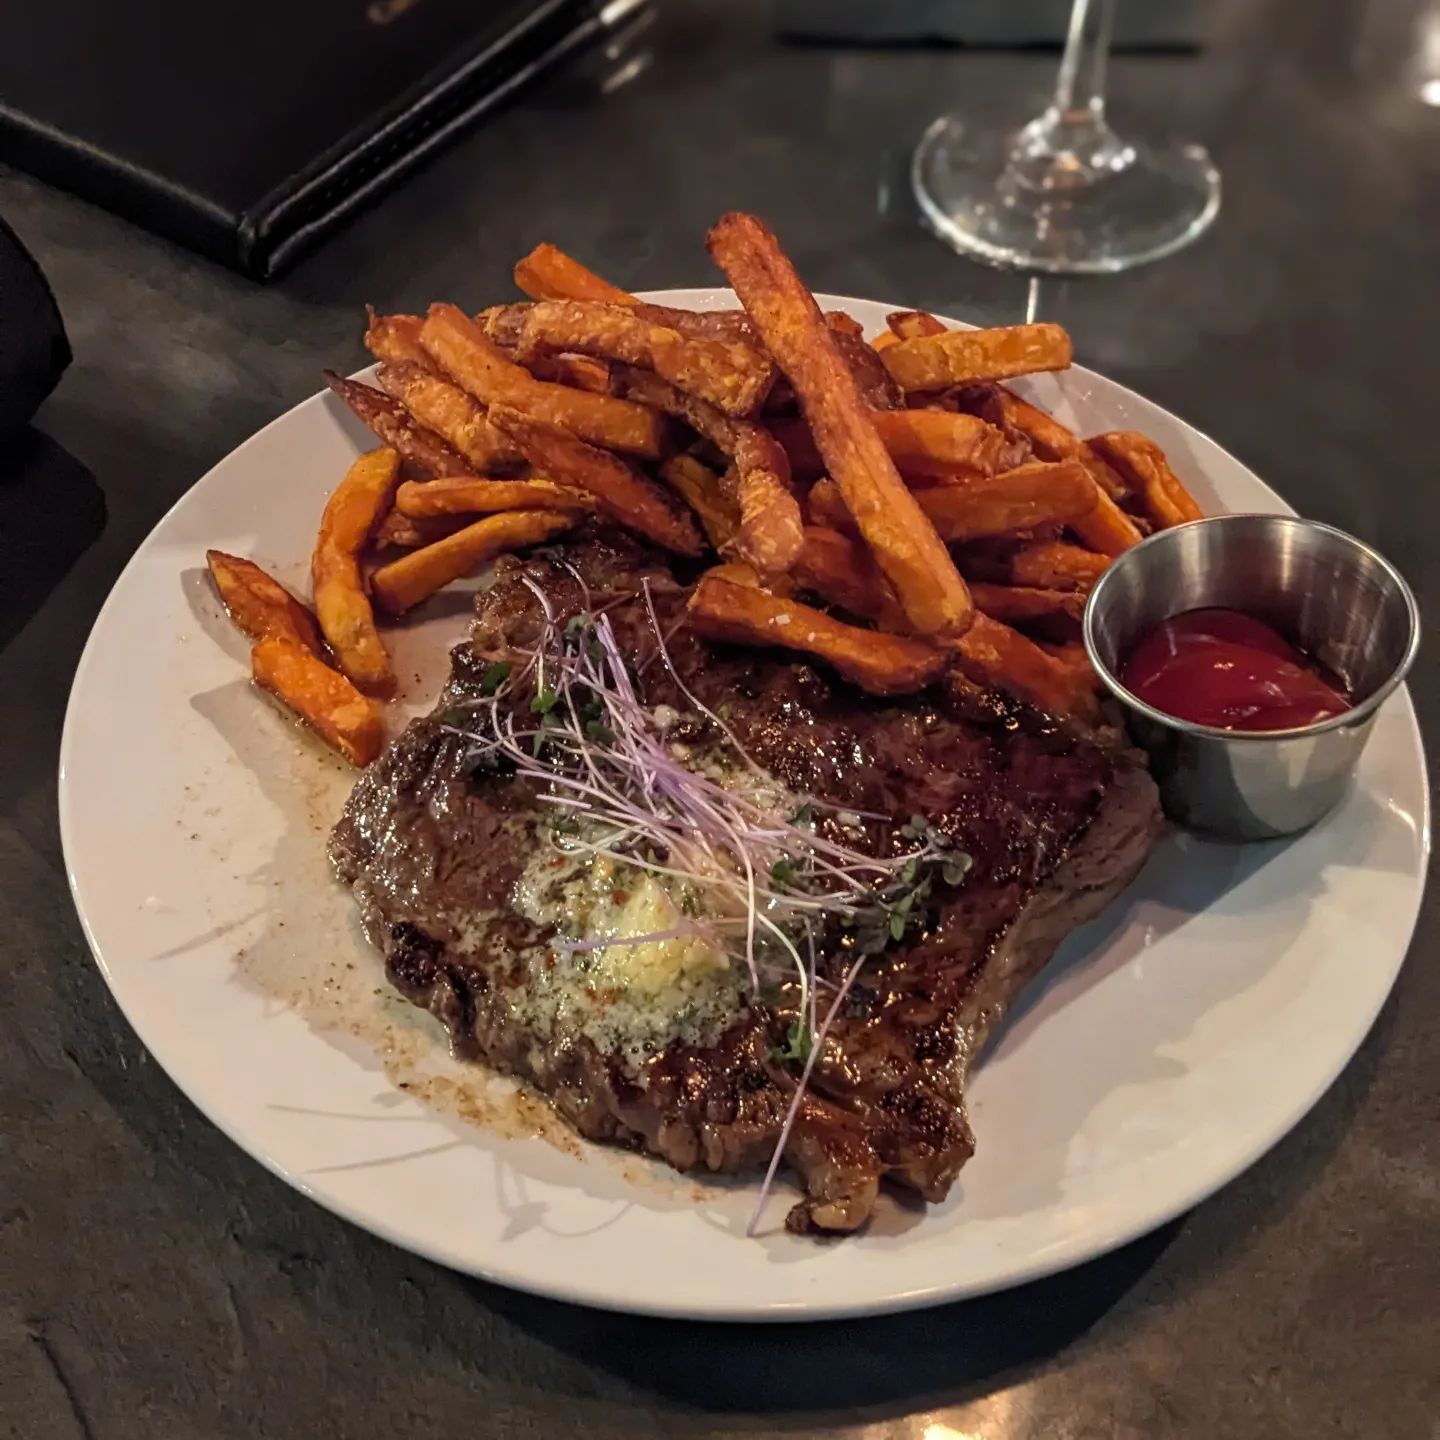 So @craftedstl is killing it here. A ribeye and fries for $15? Freaking sold. I might be coming here way too much. Love our friend Dani!! #stlouis #foodporn #citylife